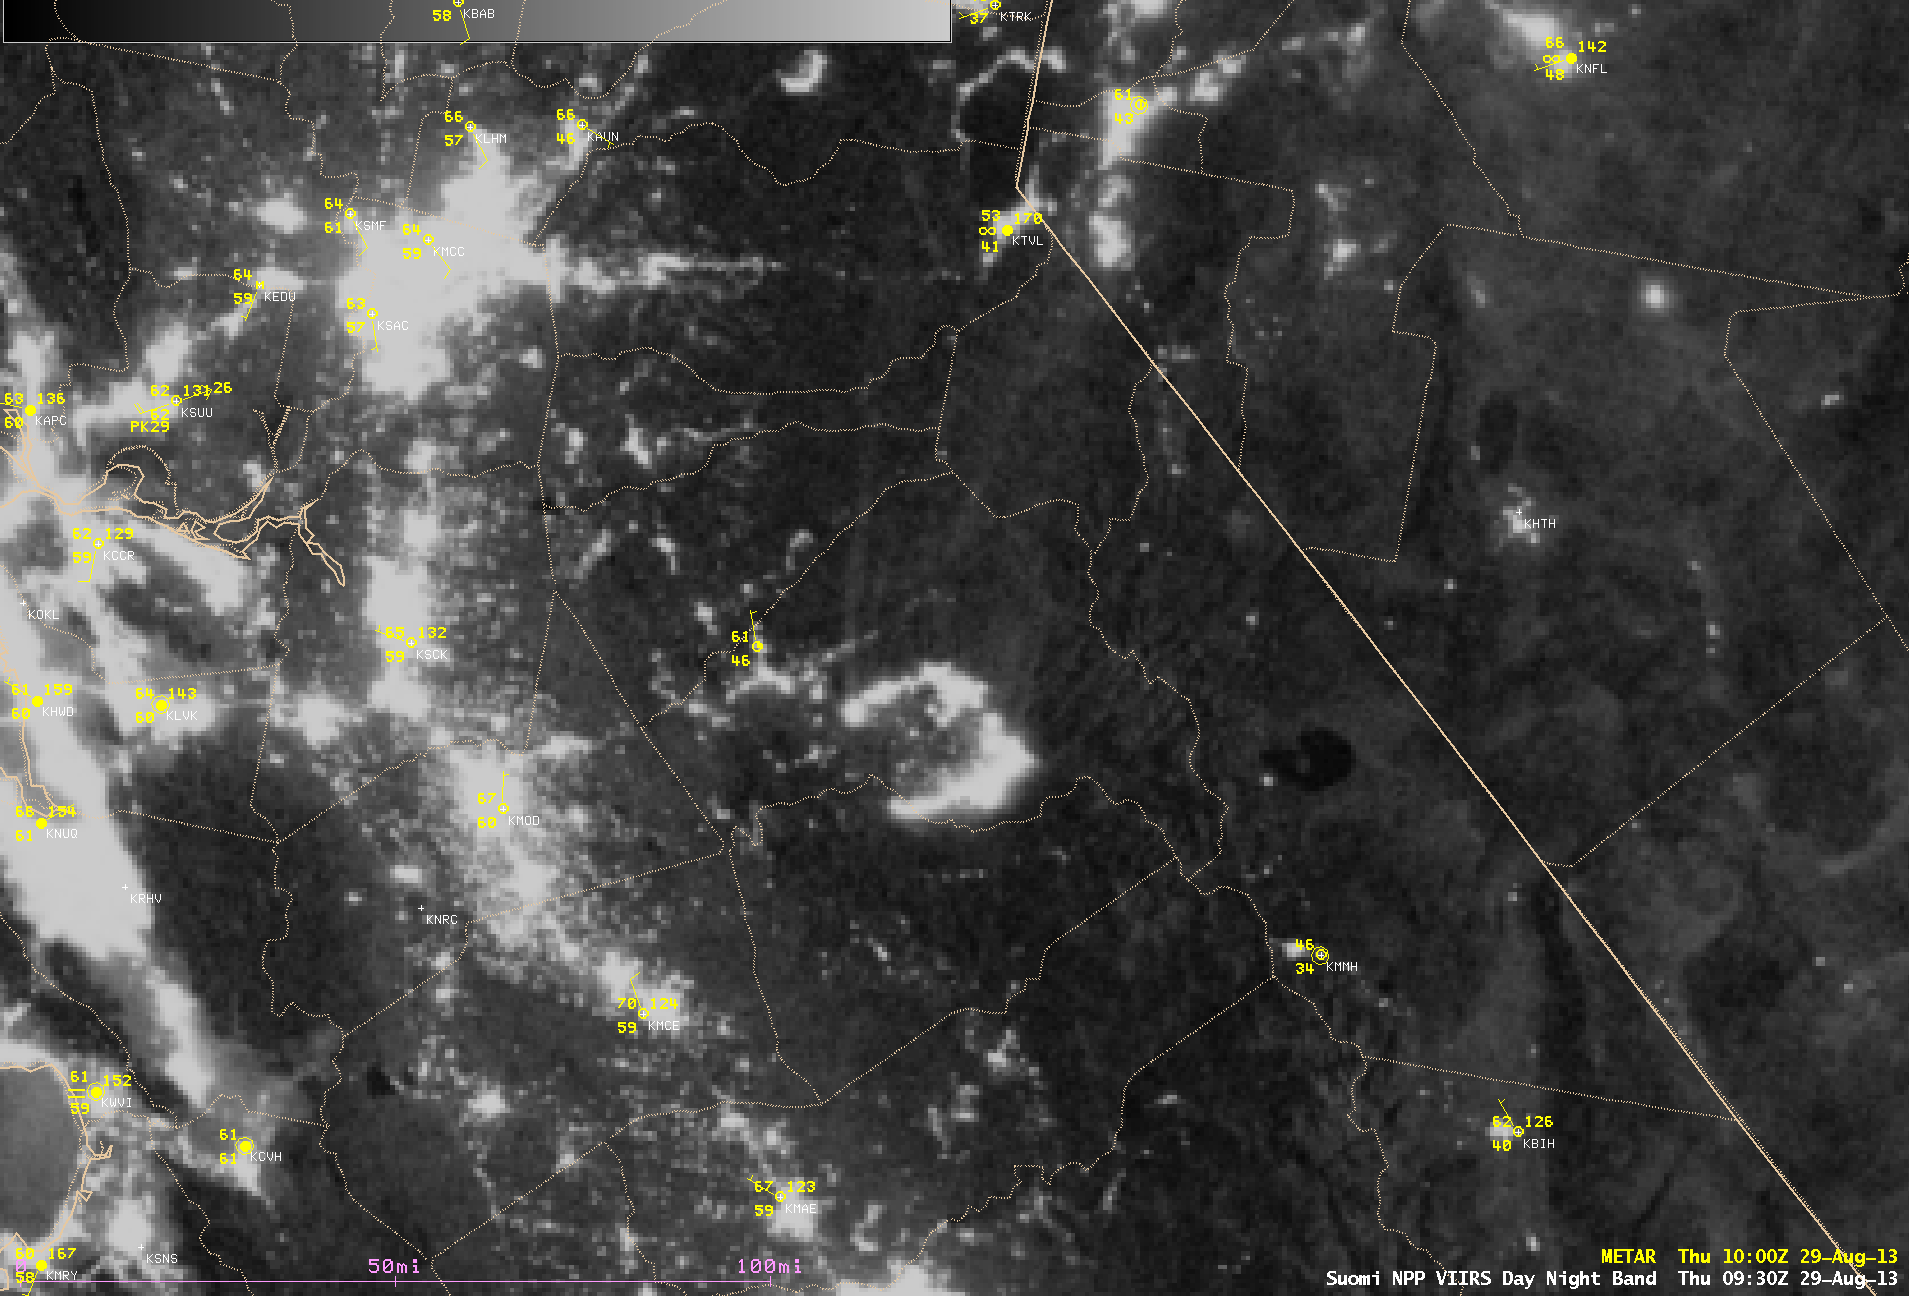 Suomi NPP VIIRS 0.7 Âµm Day/Night Band and 3.74 Âµm shortwave IR images (29 August)